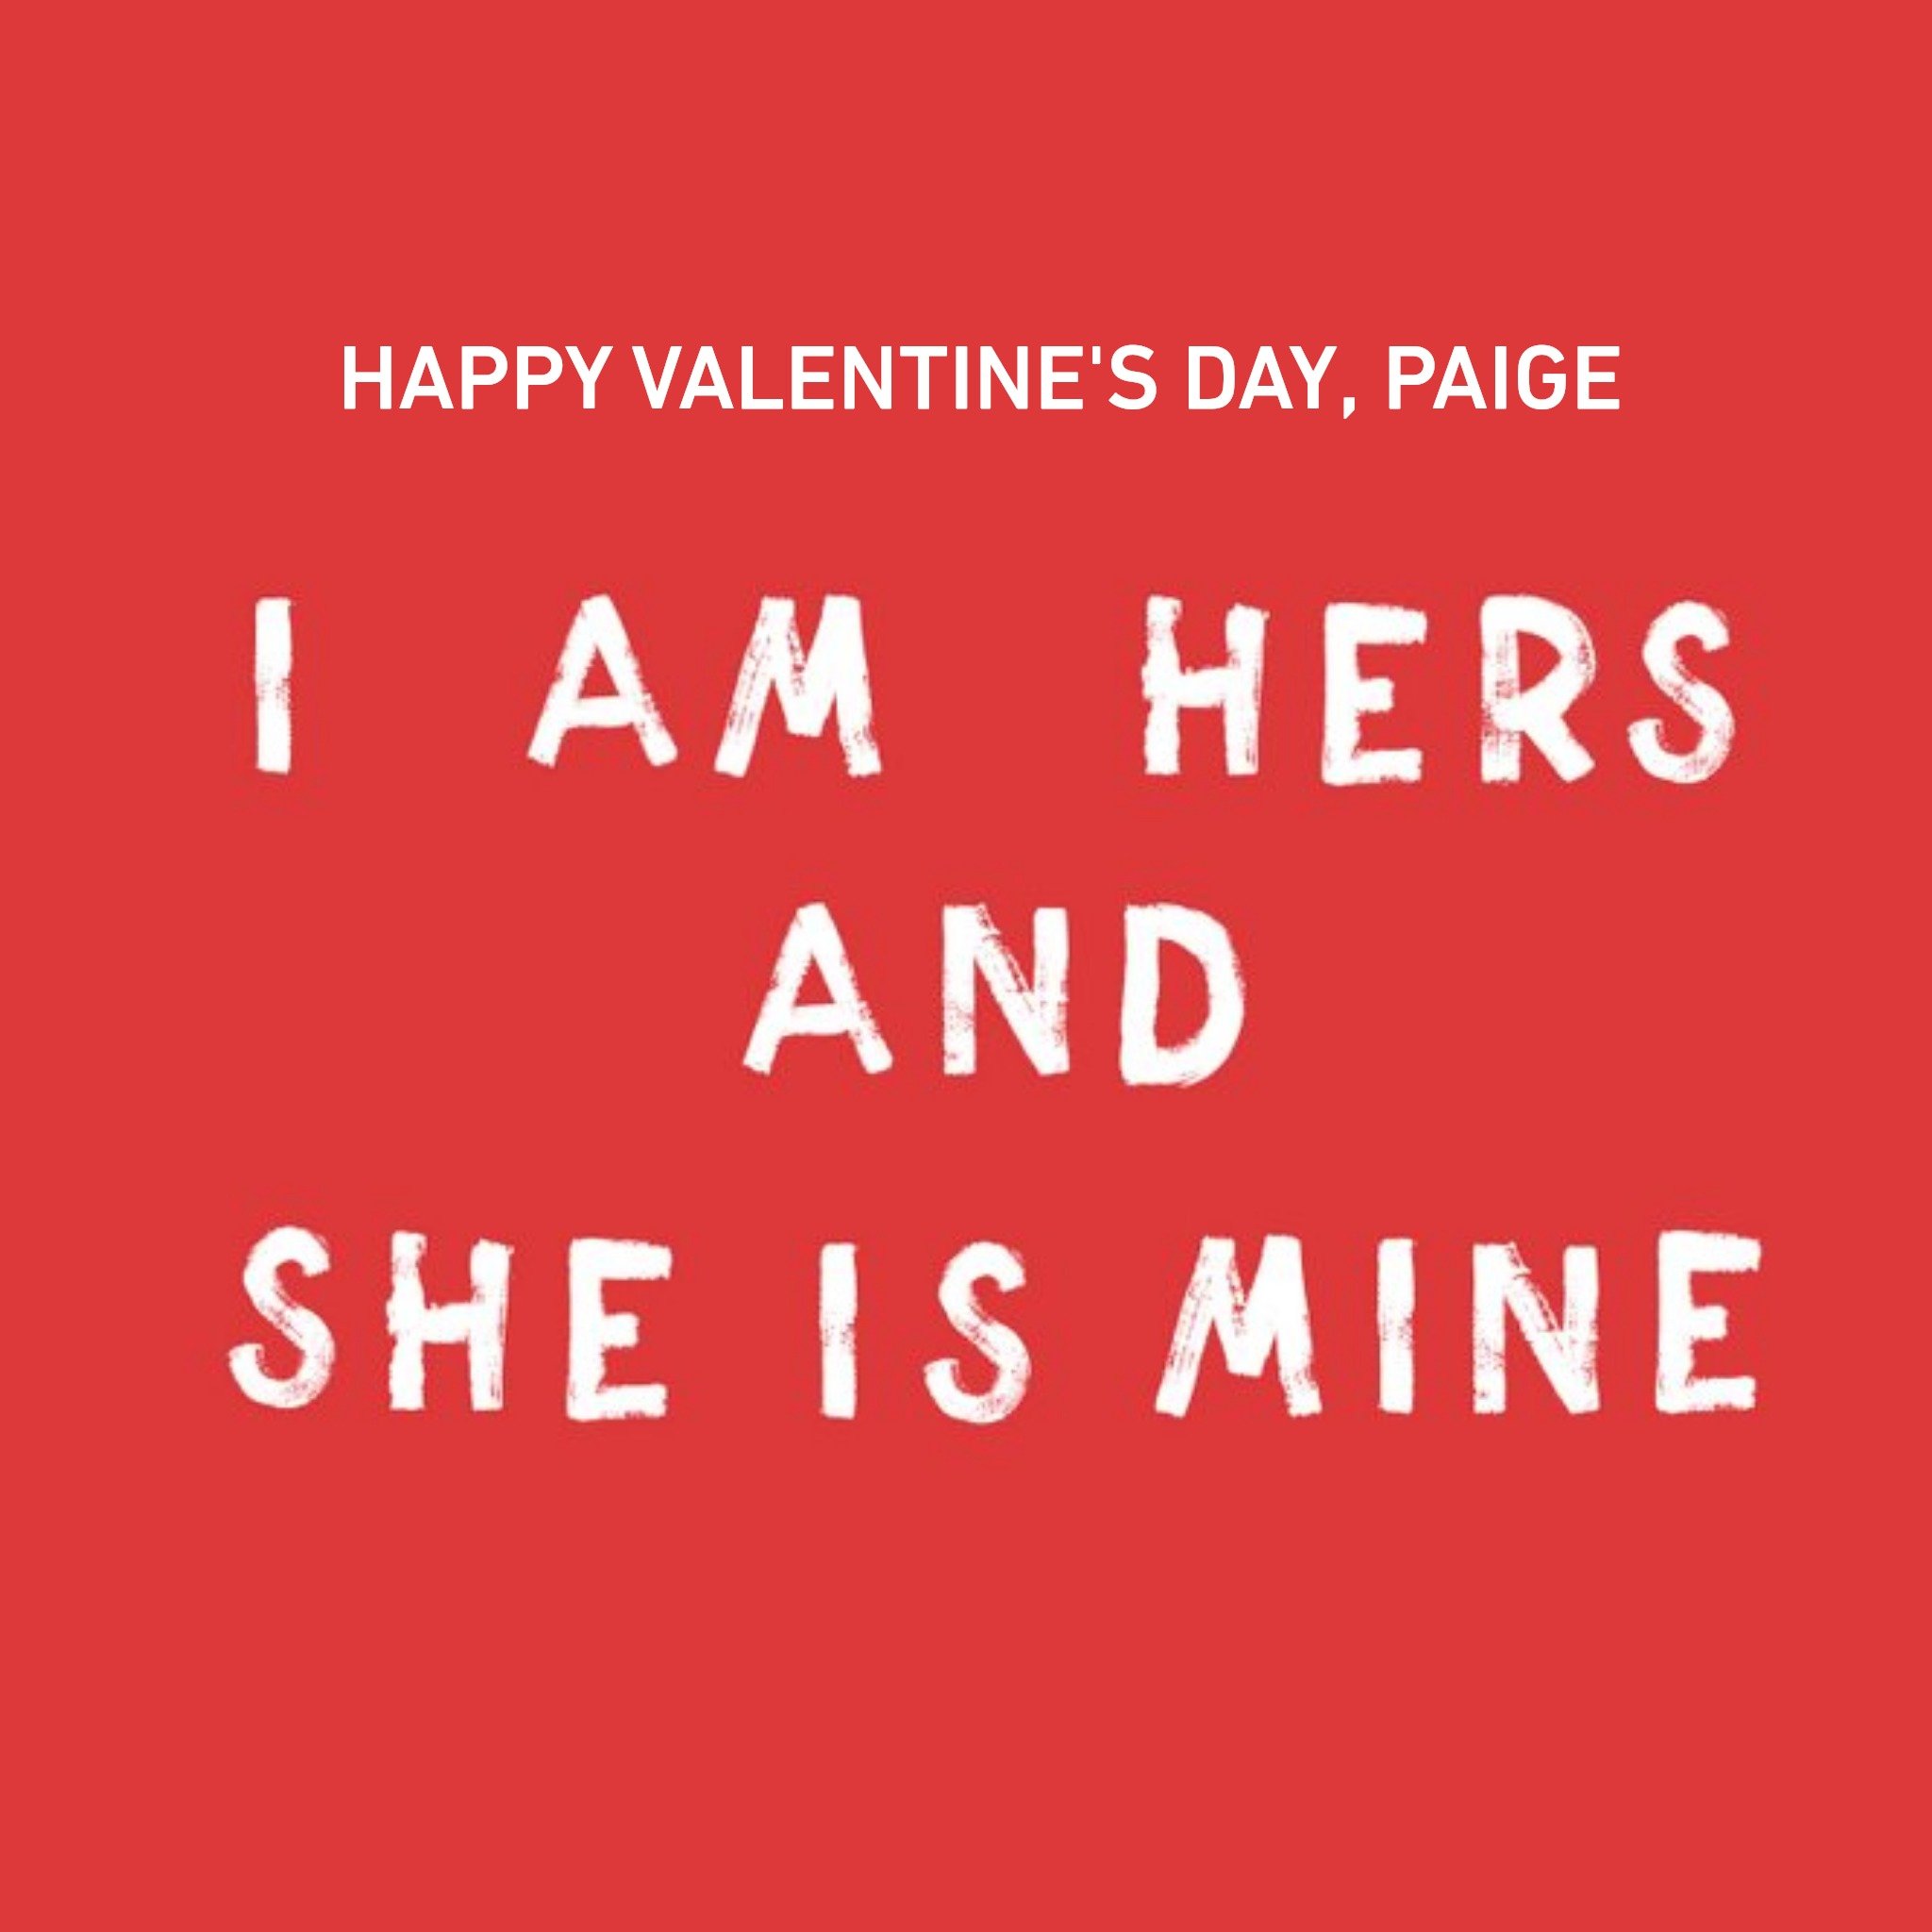 Moonpig Modern Design Typographic Red And White Lesbian Happy Valentines Day Card, Square